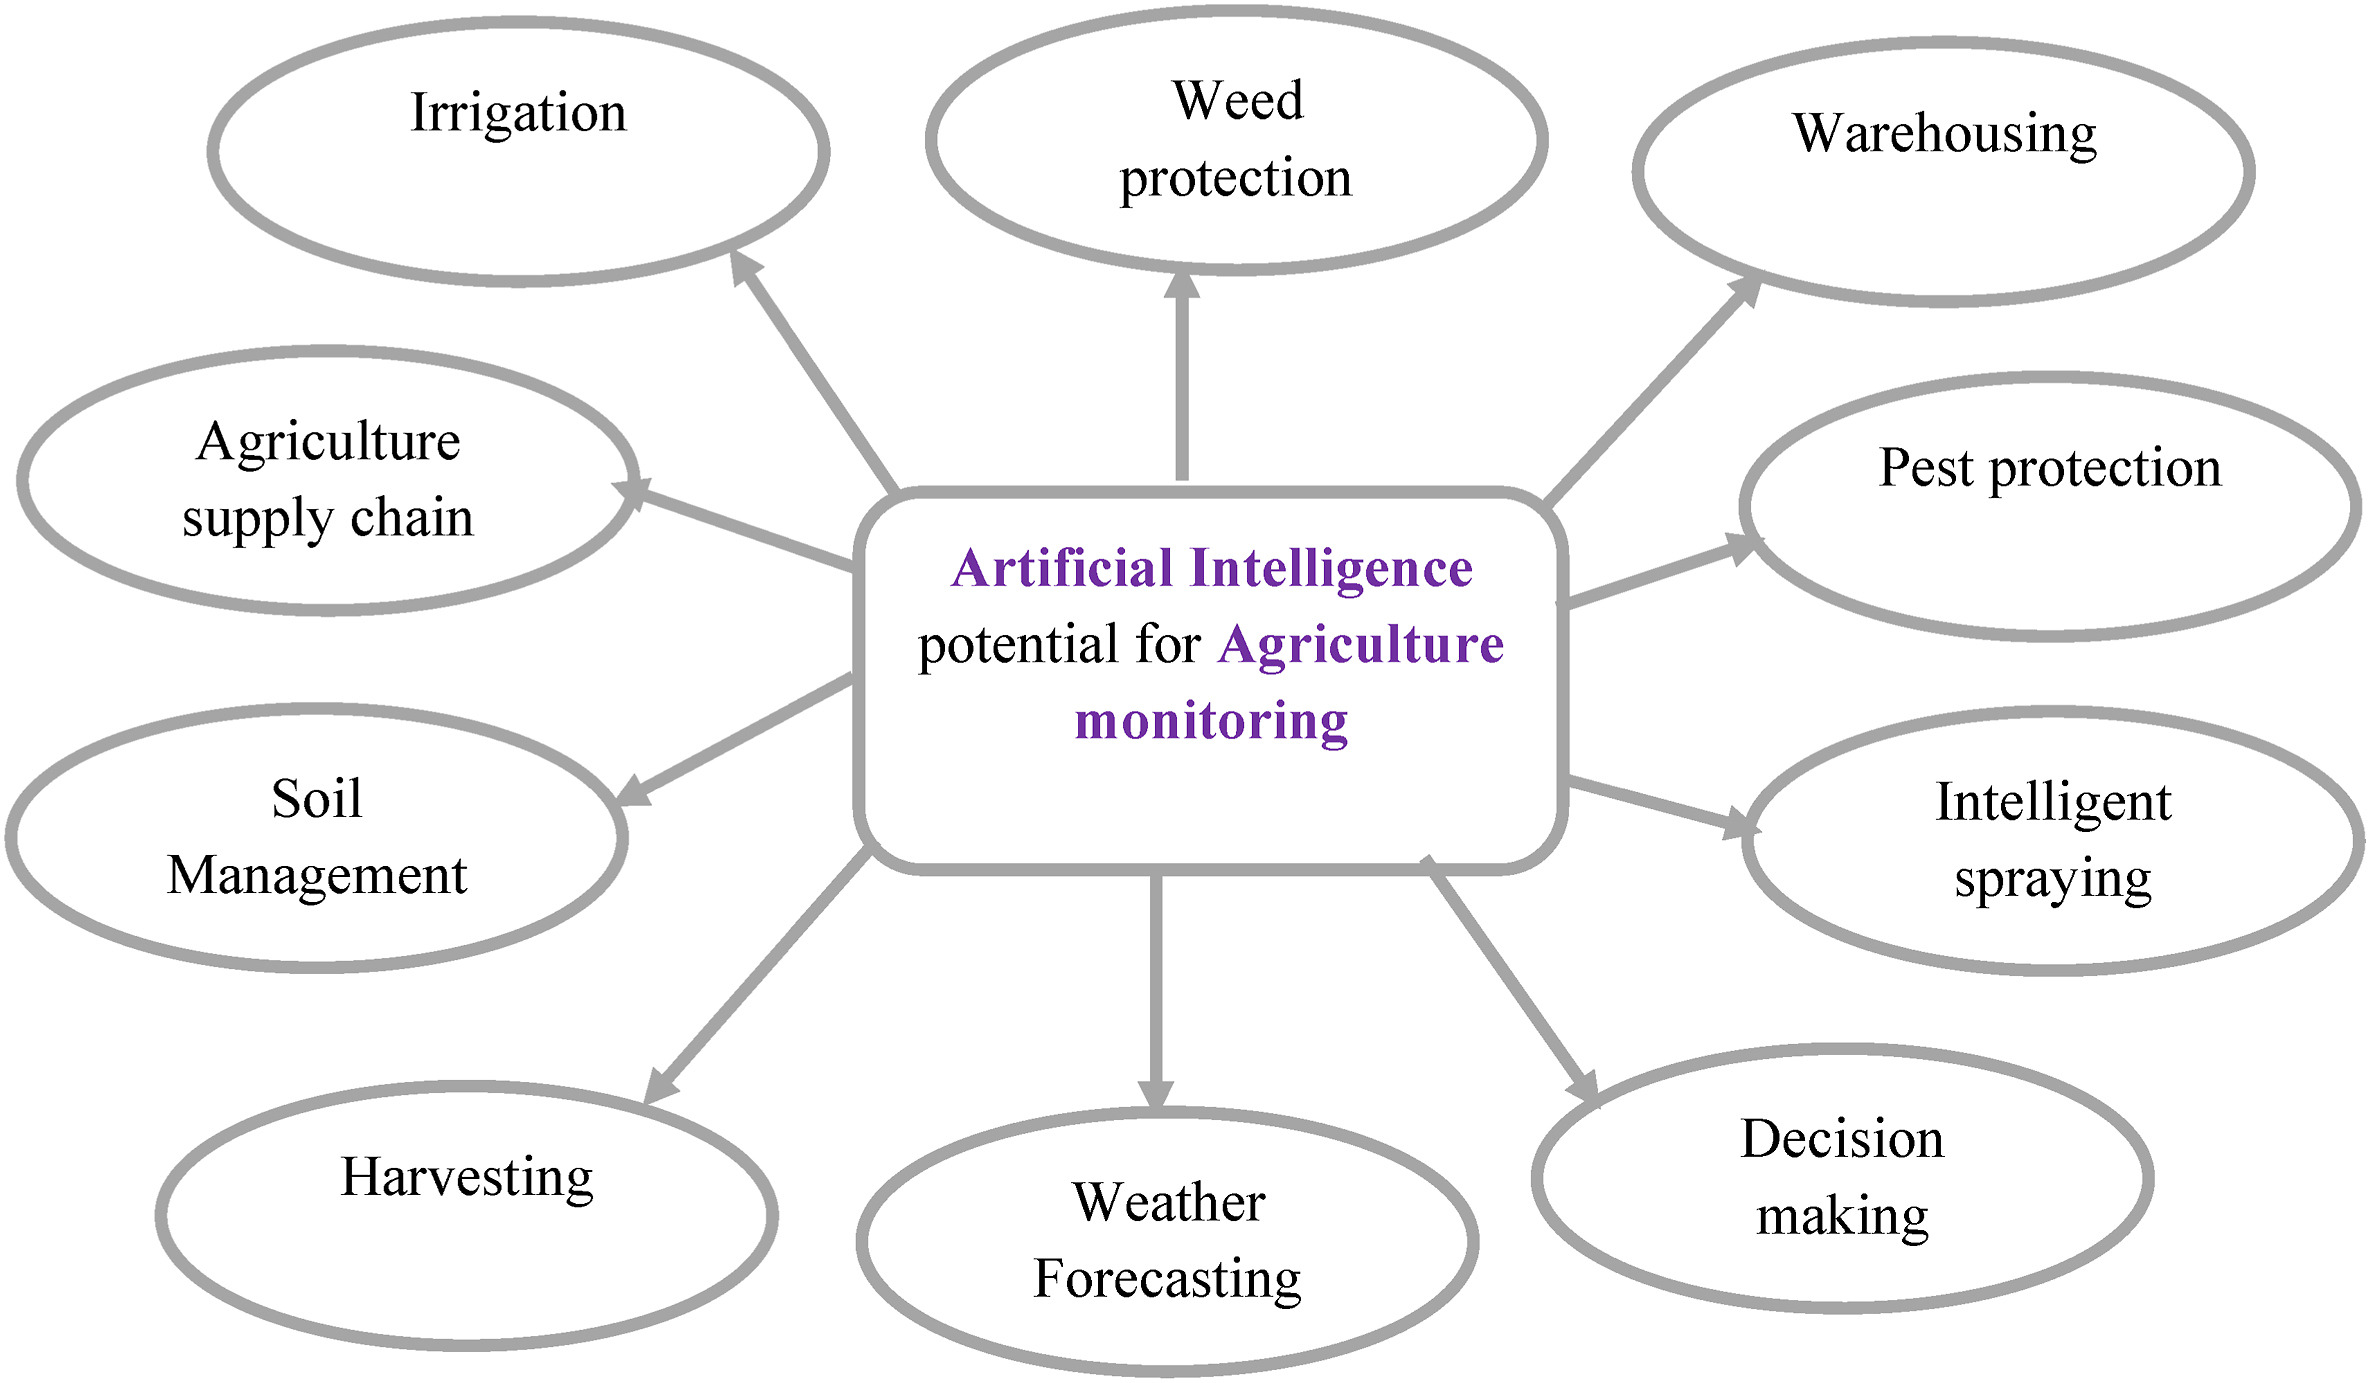 Artificial Intelligence is being used in Agriculture to monitor these areas